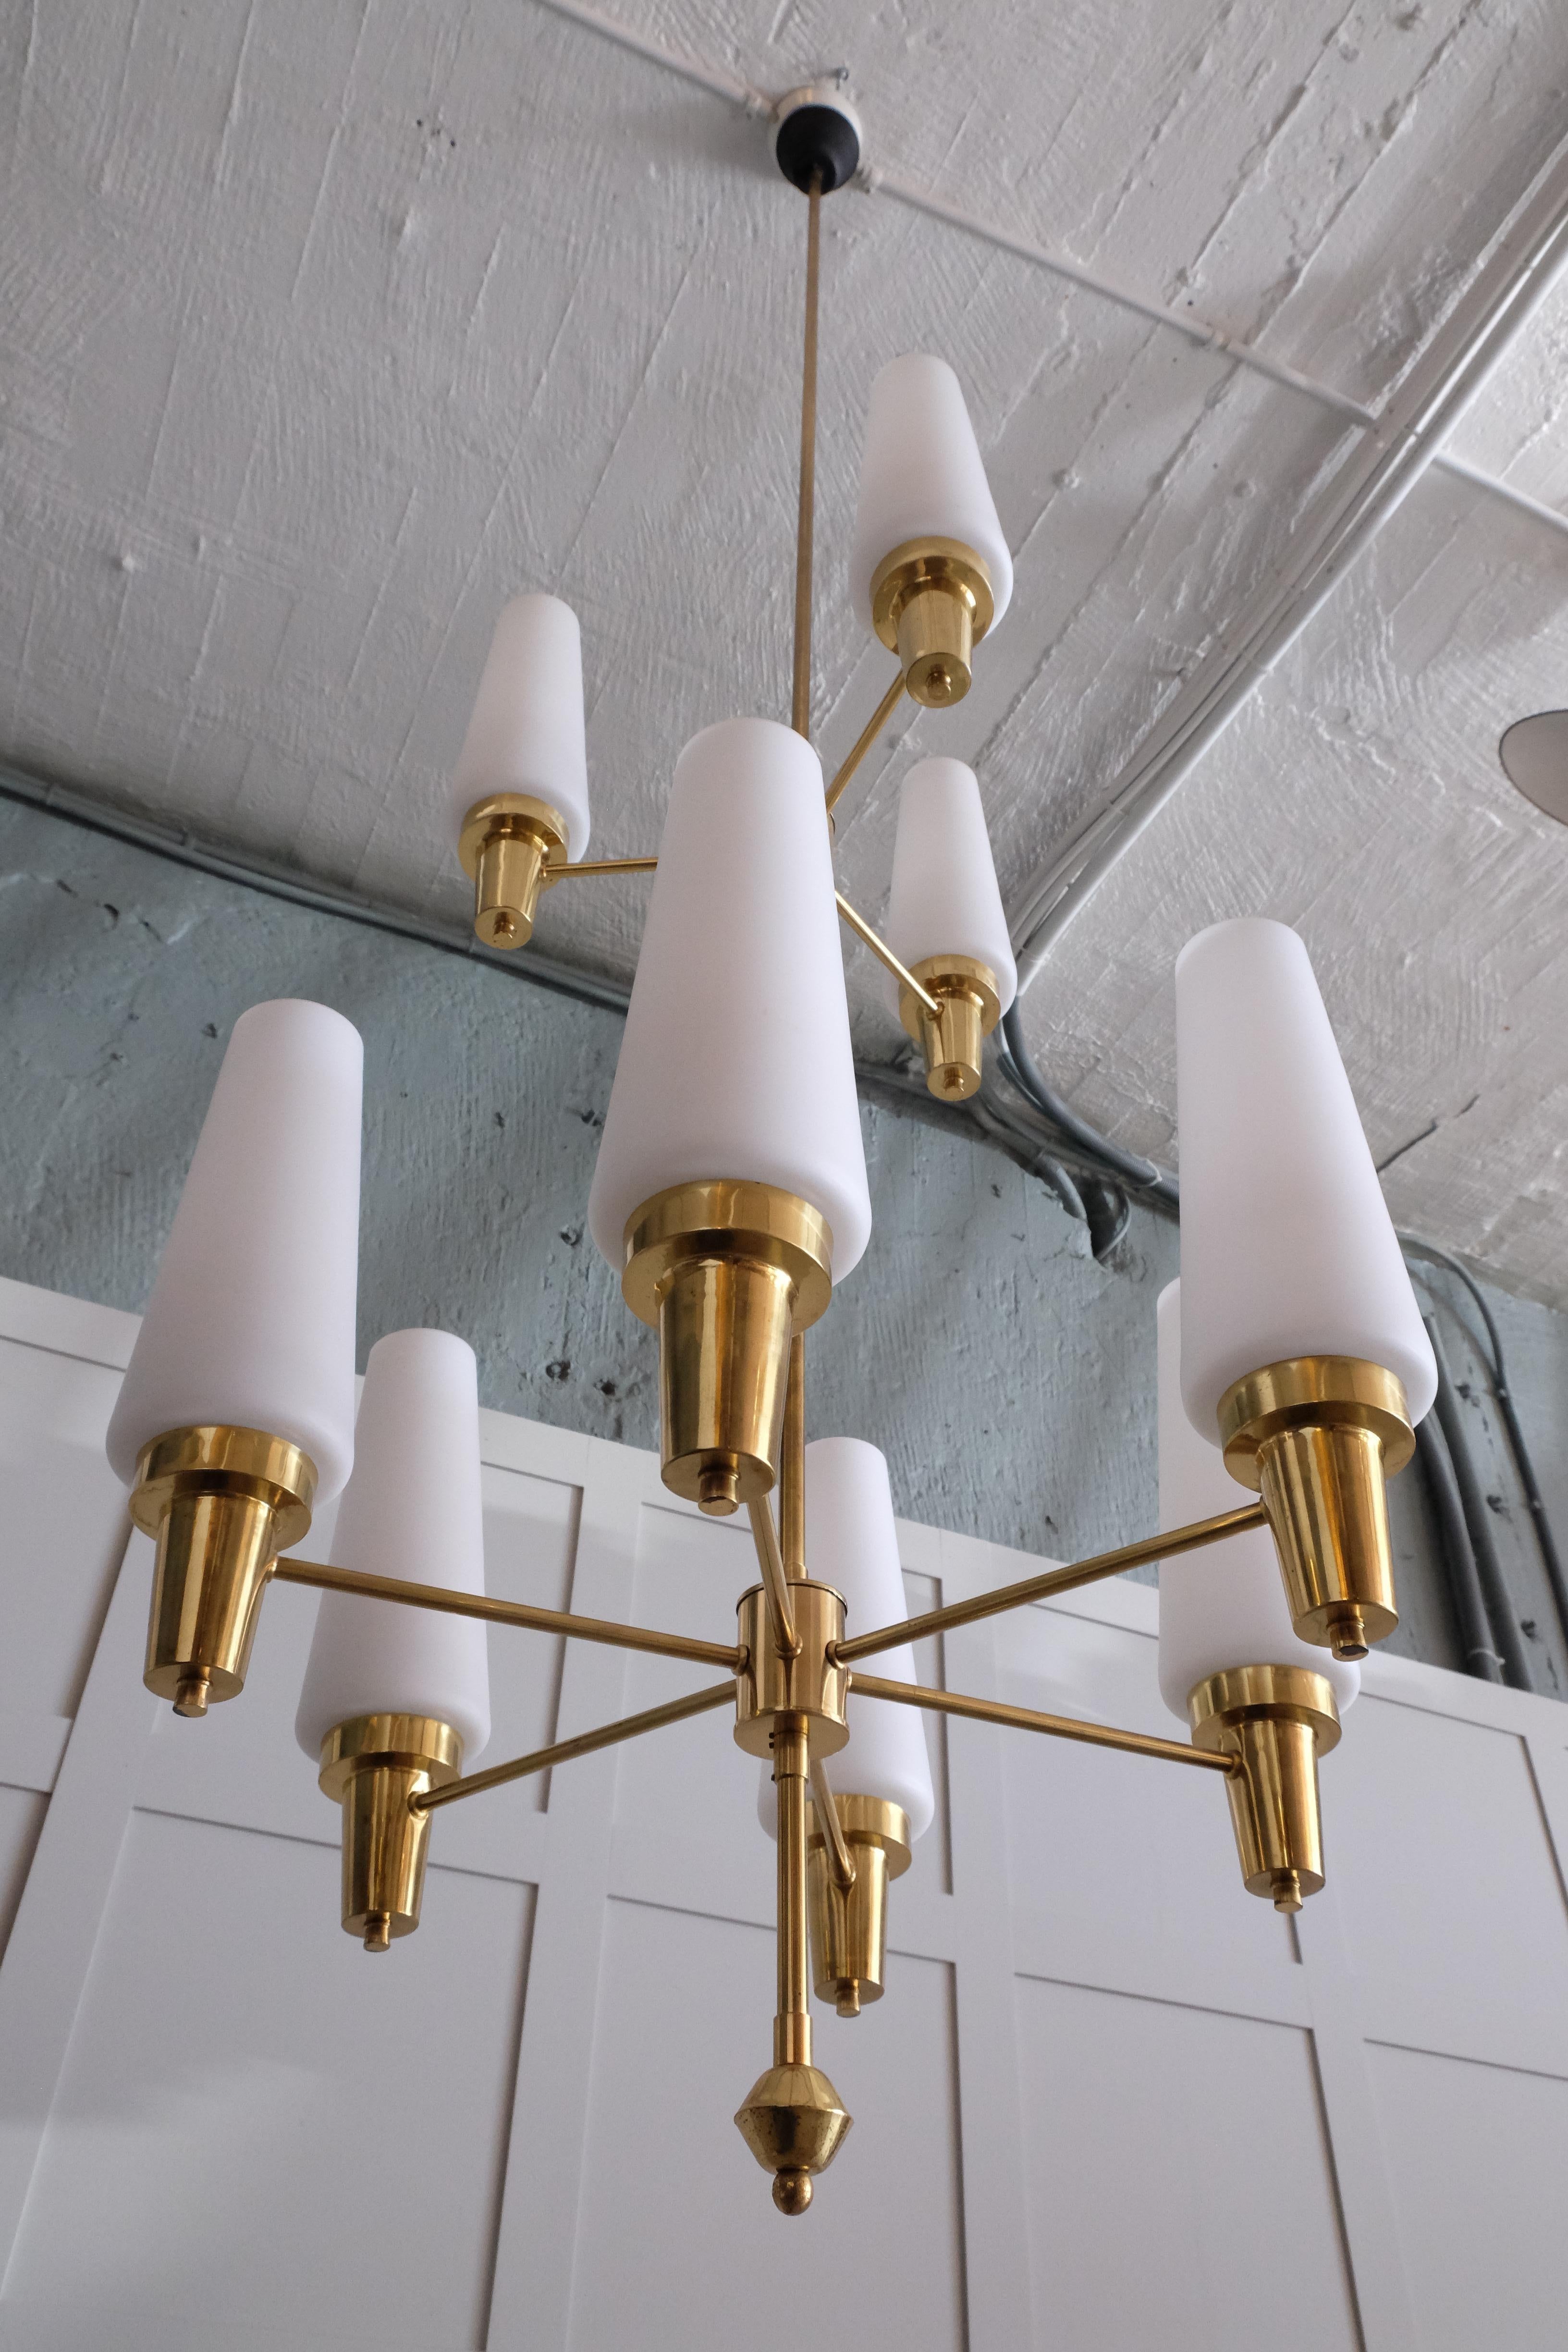 Mid-20th Century Pair of Swedish Brass Chandeliers, 1950s For Sale